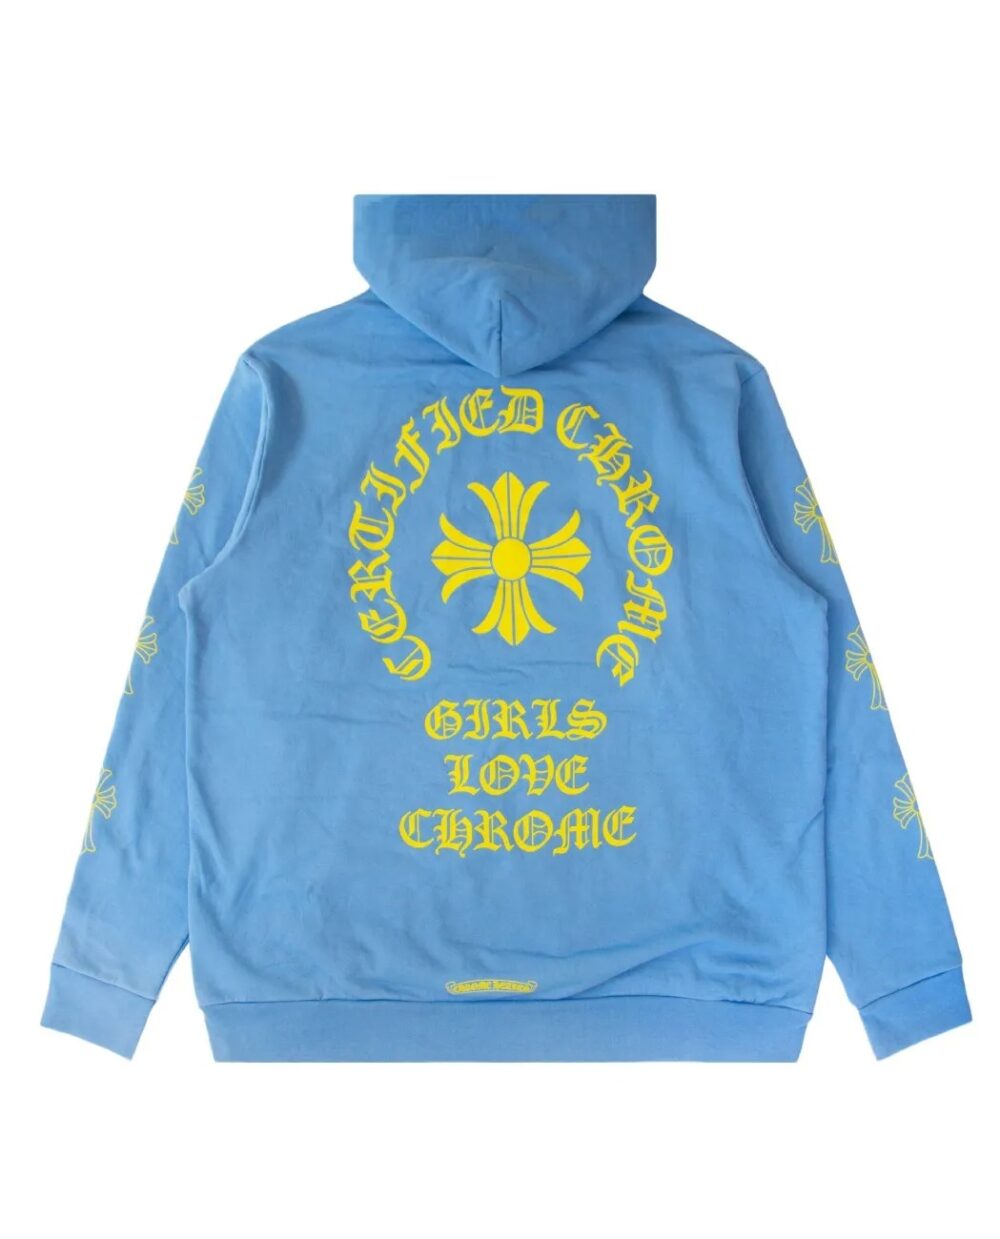 Chrome Hearts x Drake, ChHoodie, Girls Love Chrome, High-quality Cotton Blend, Regular Fit, Attached hood with adjustable drawstrings, Long sleeves with ribbed cuffs